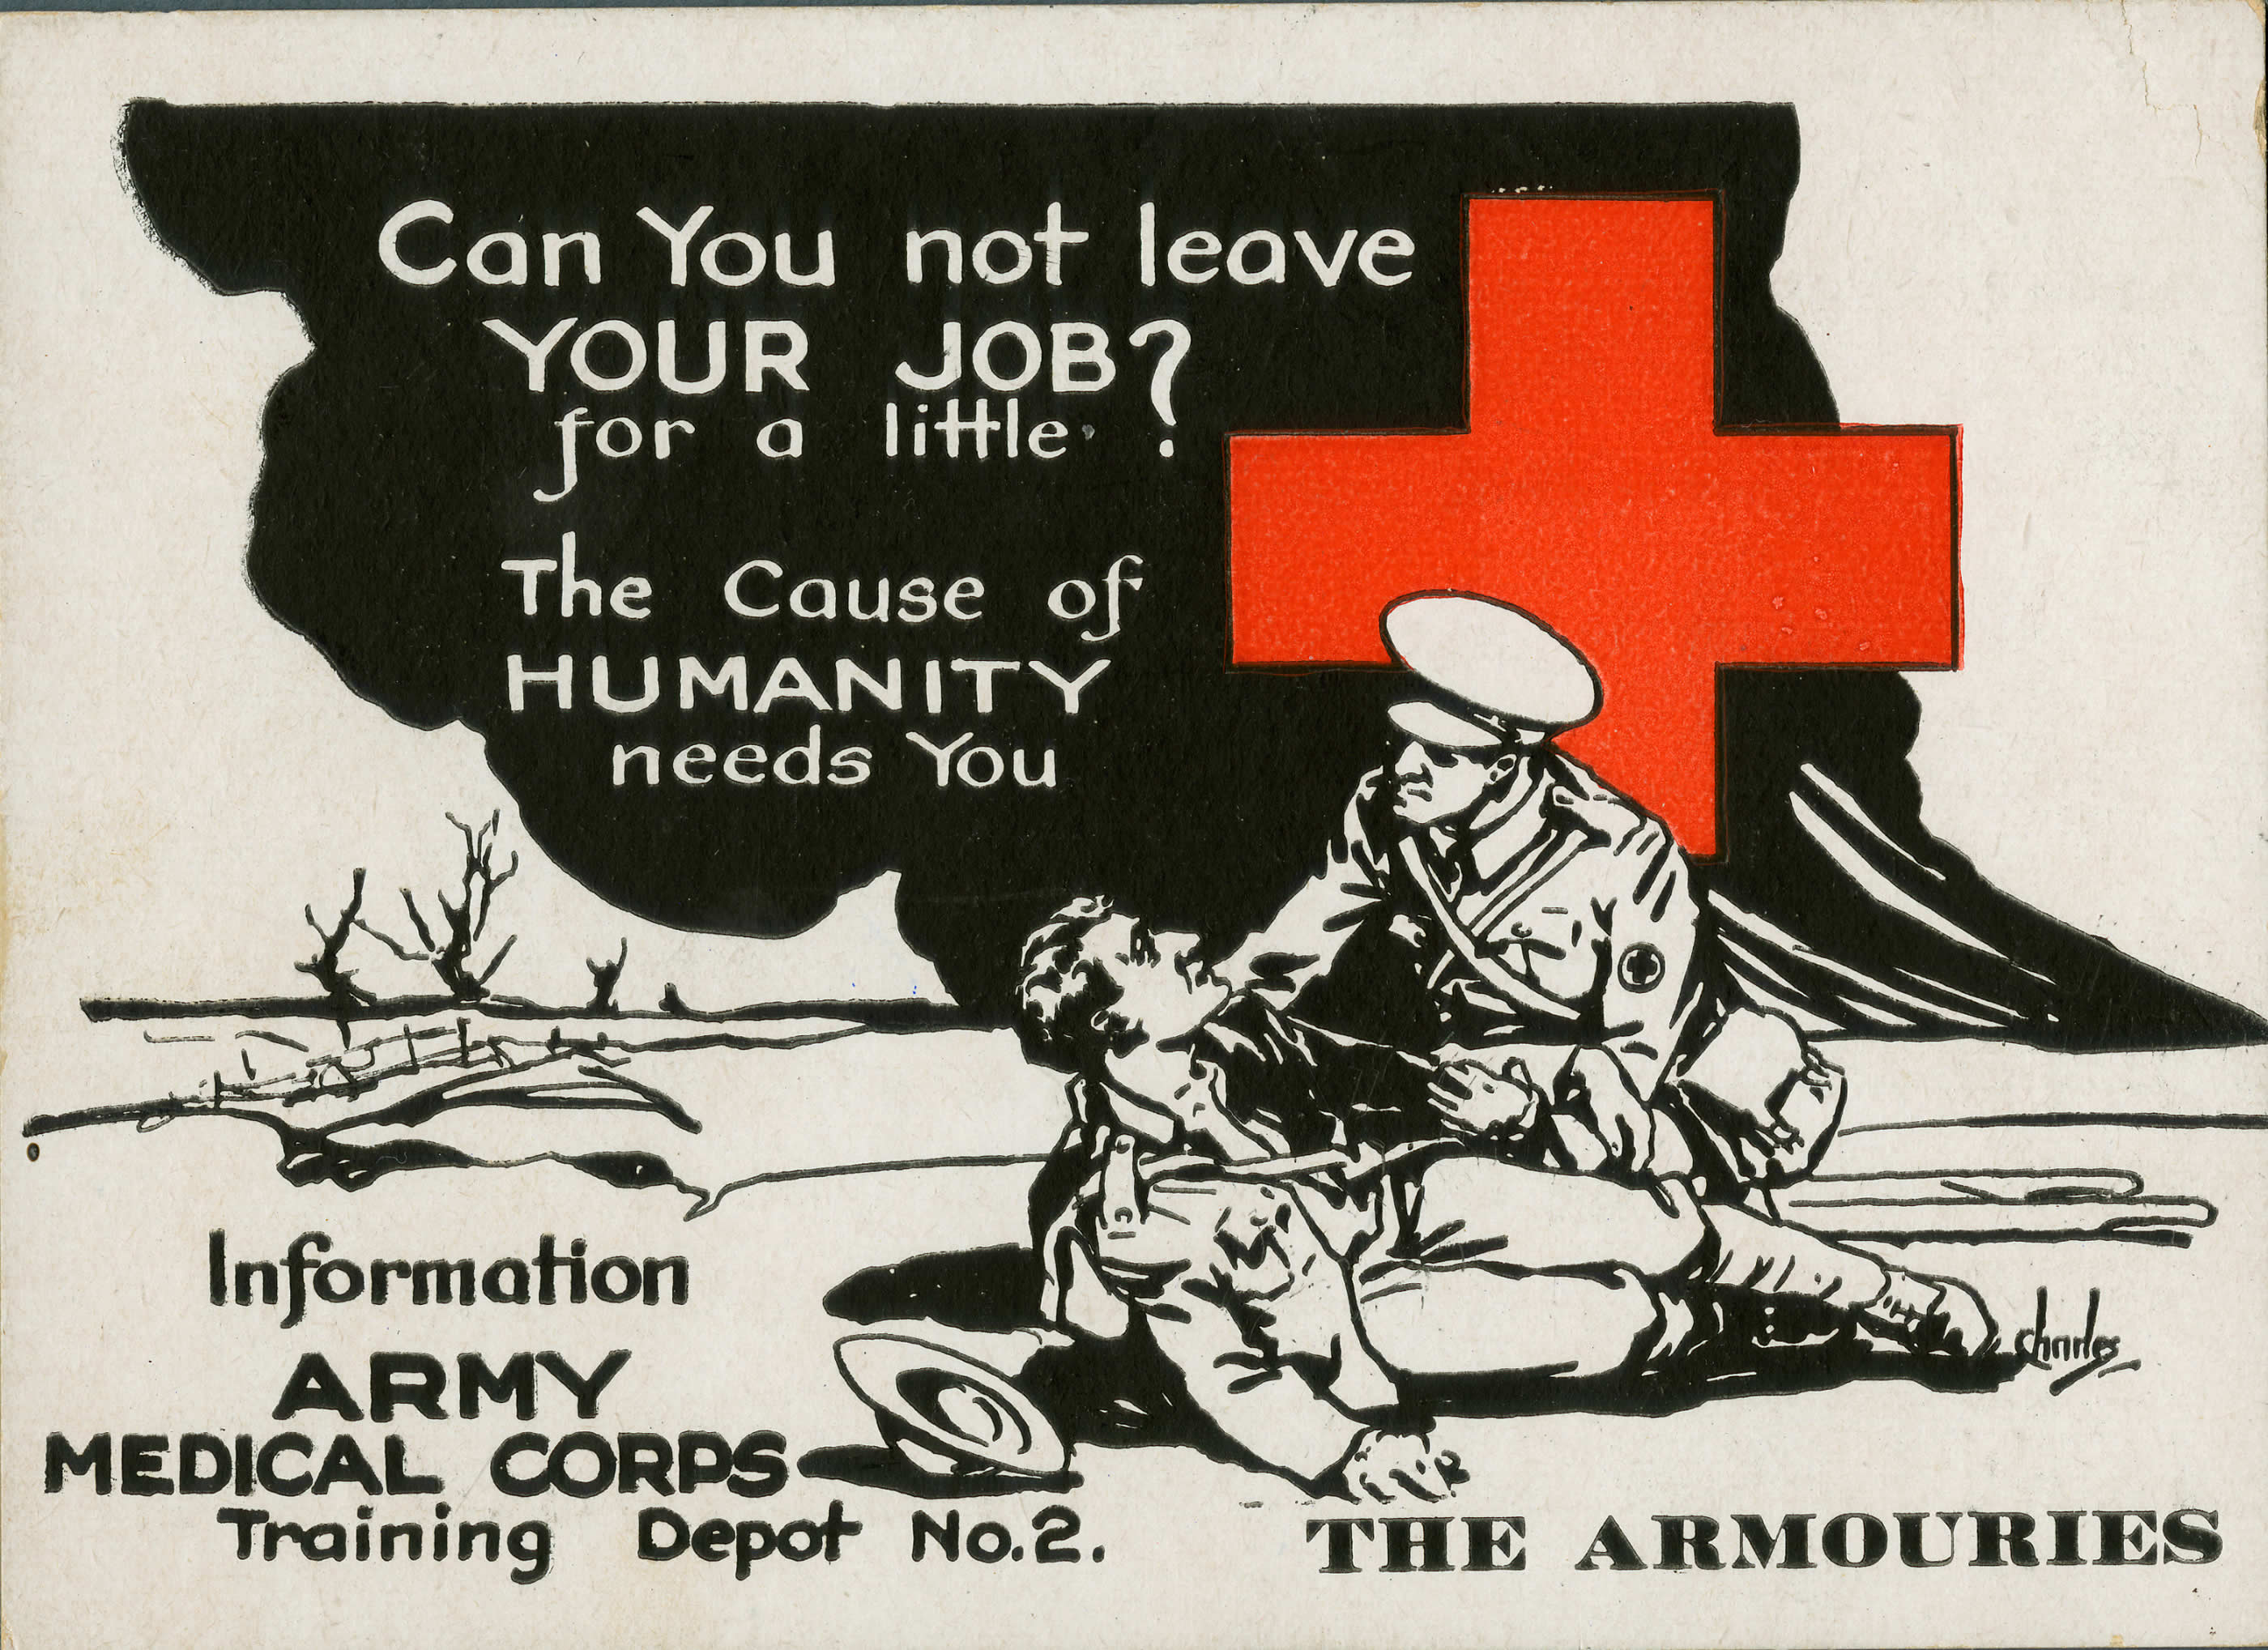 Recruiting for the Medical Corps